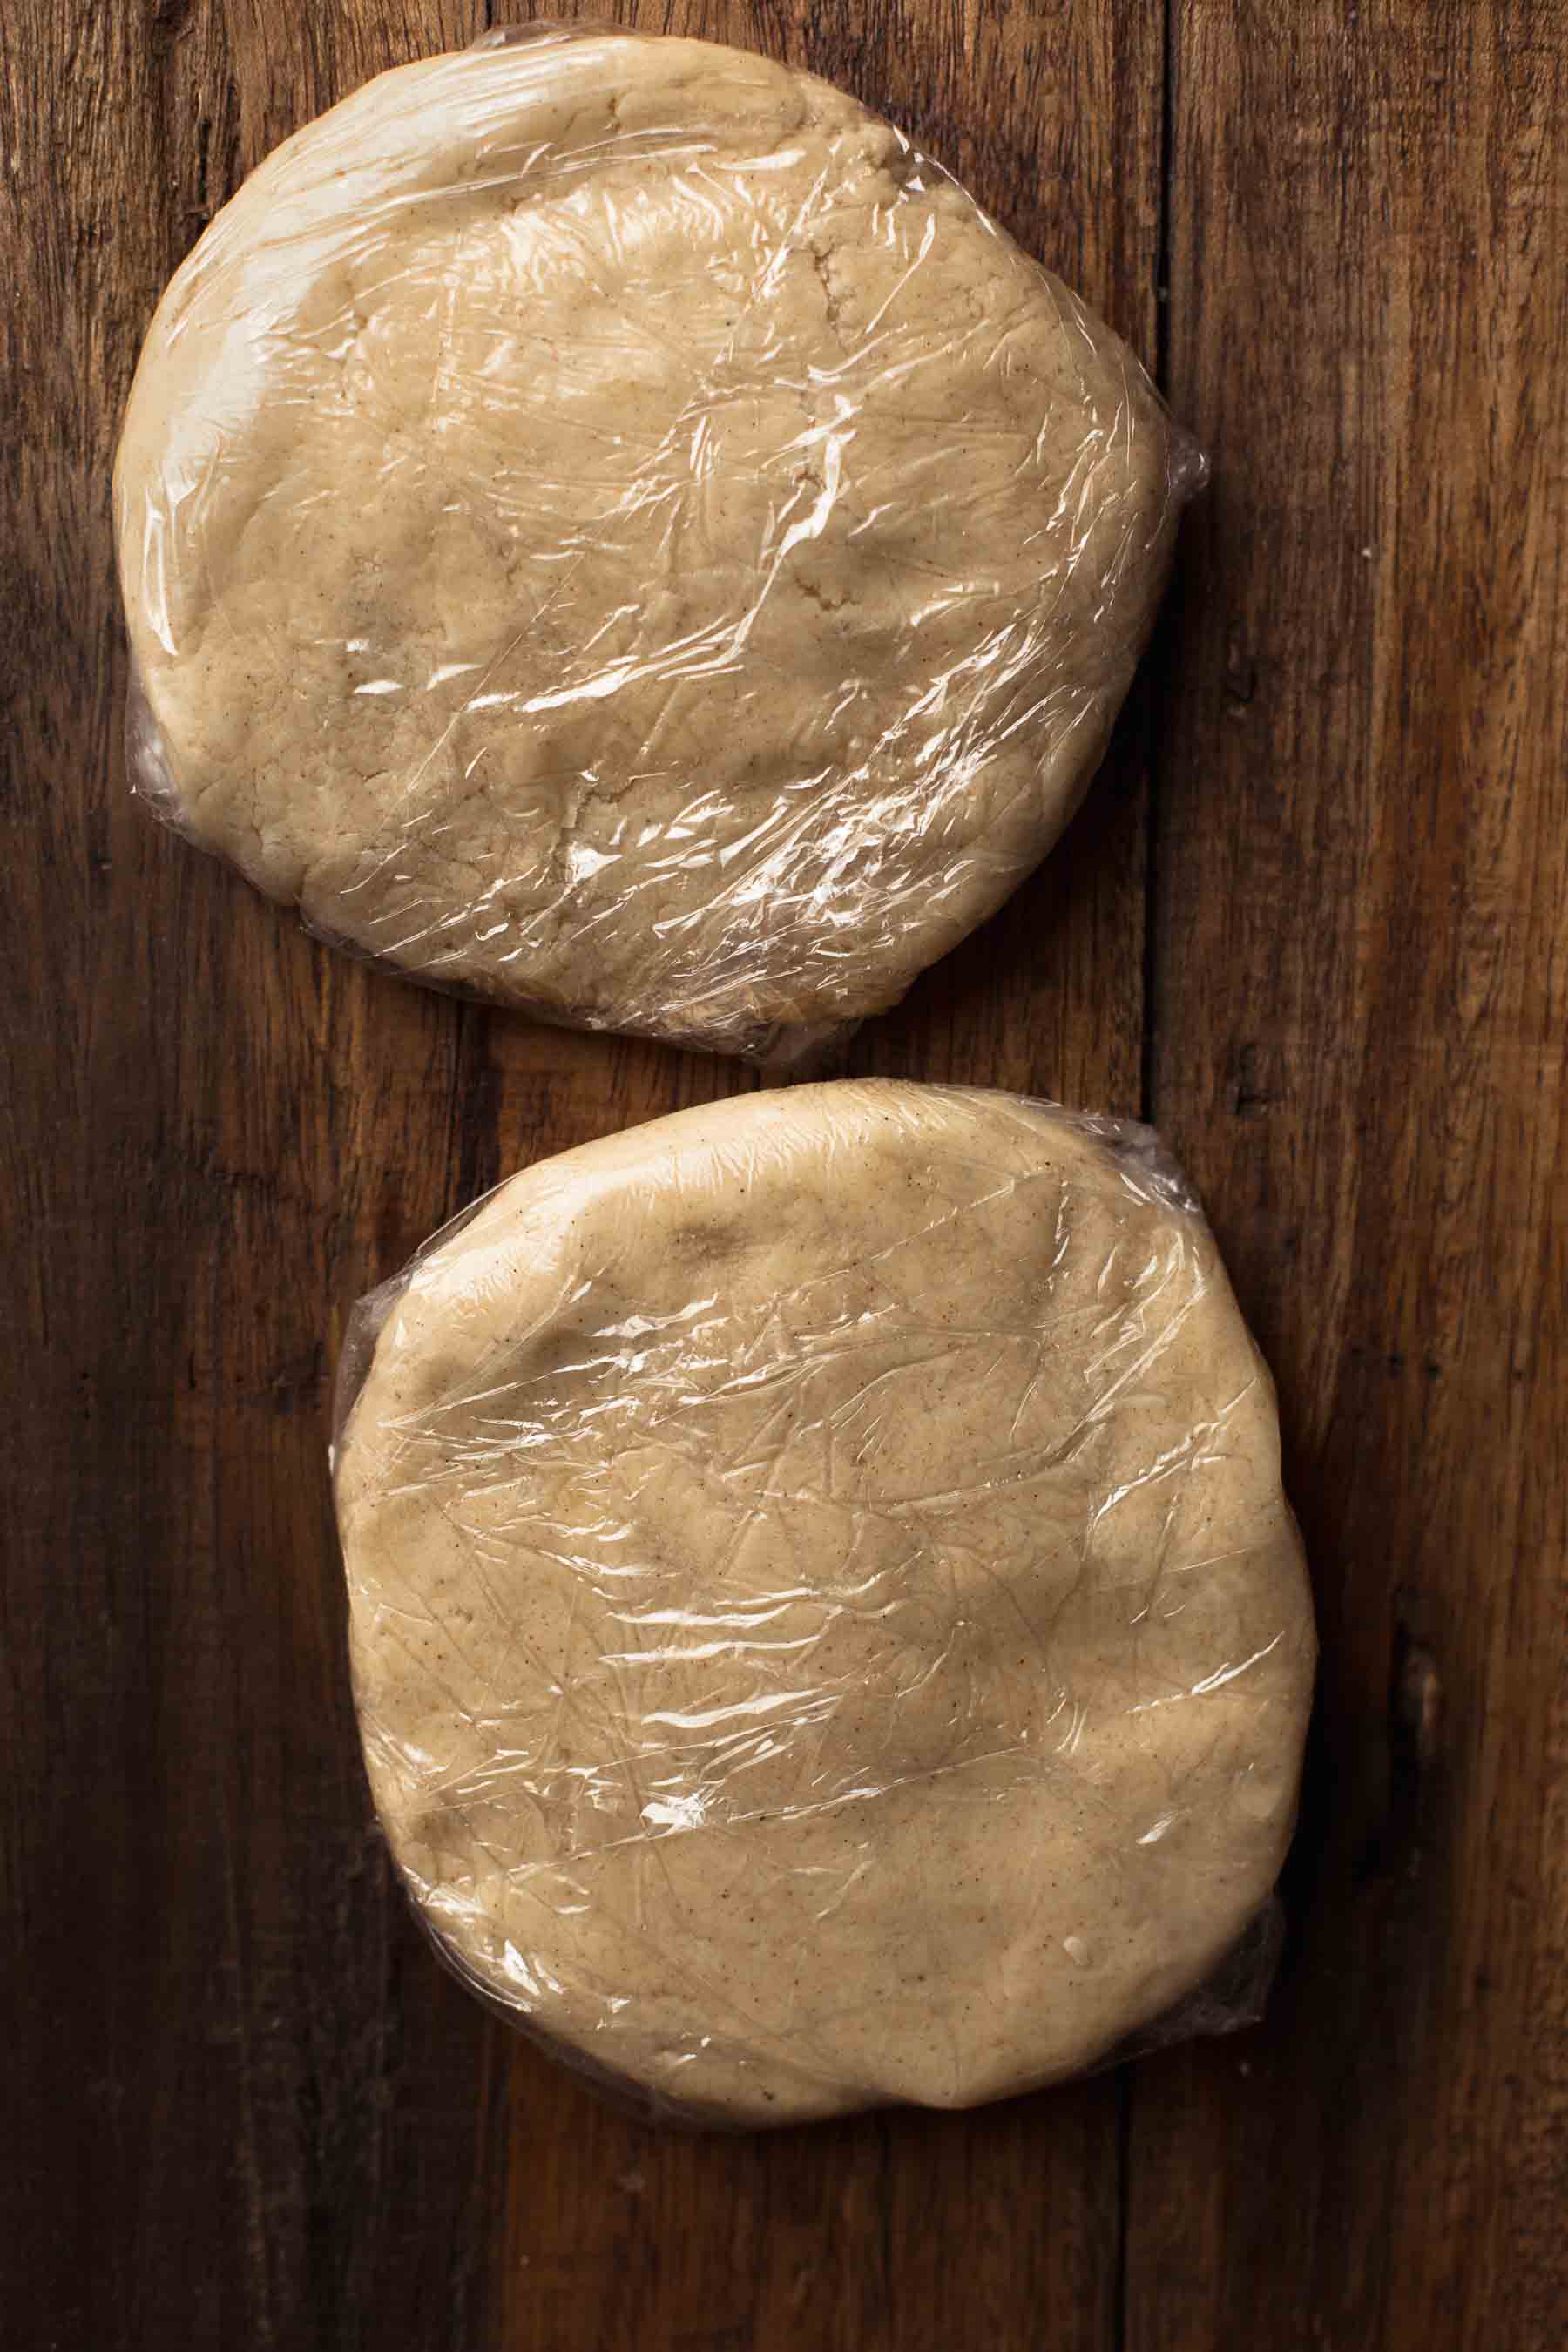 two unbaked cookies dough discs wrapped in plastic wrap